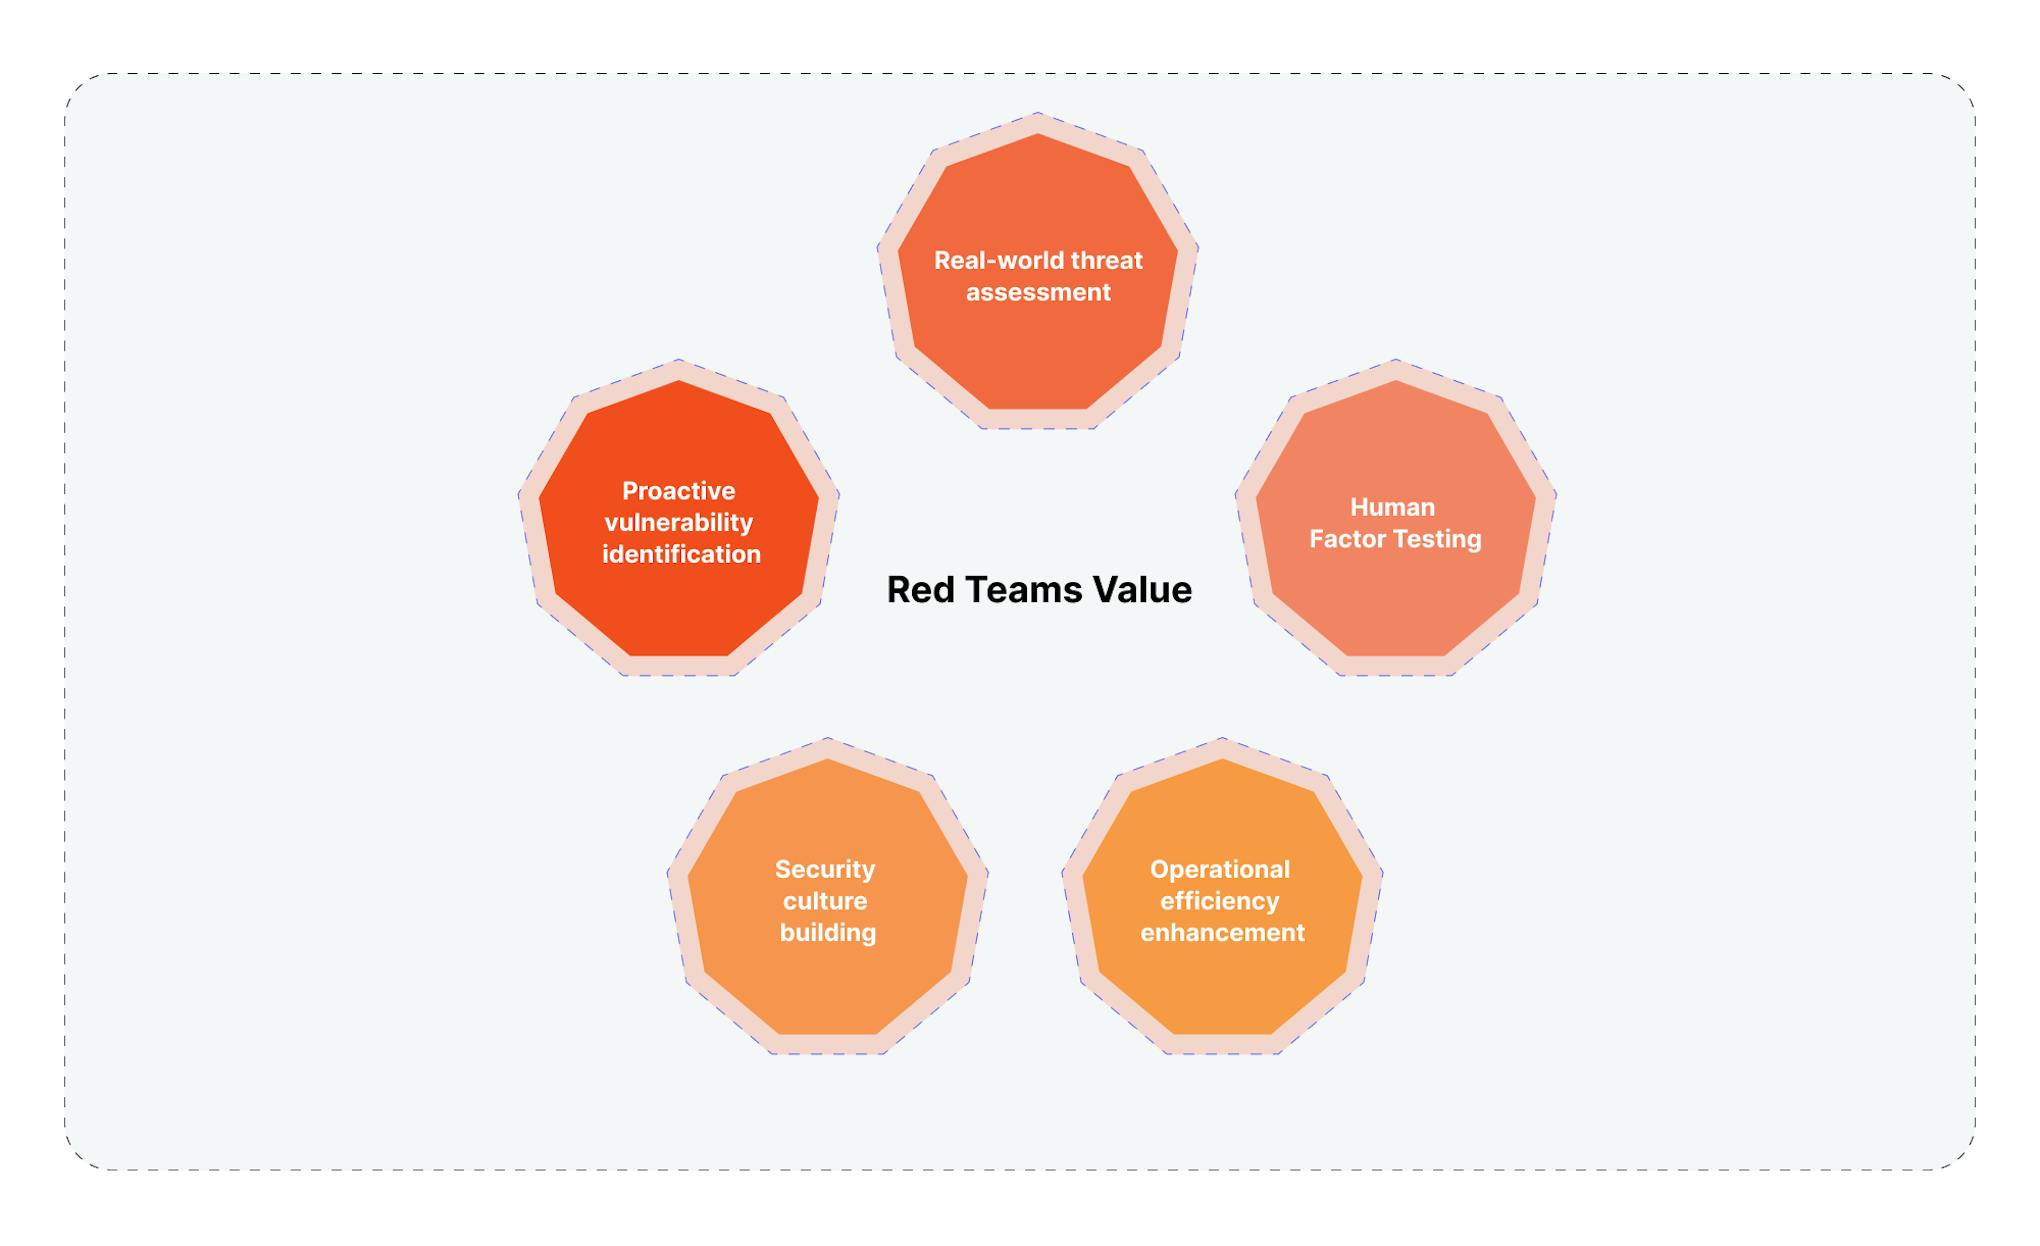 Value red teams bring to companies